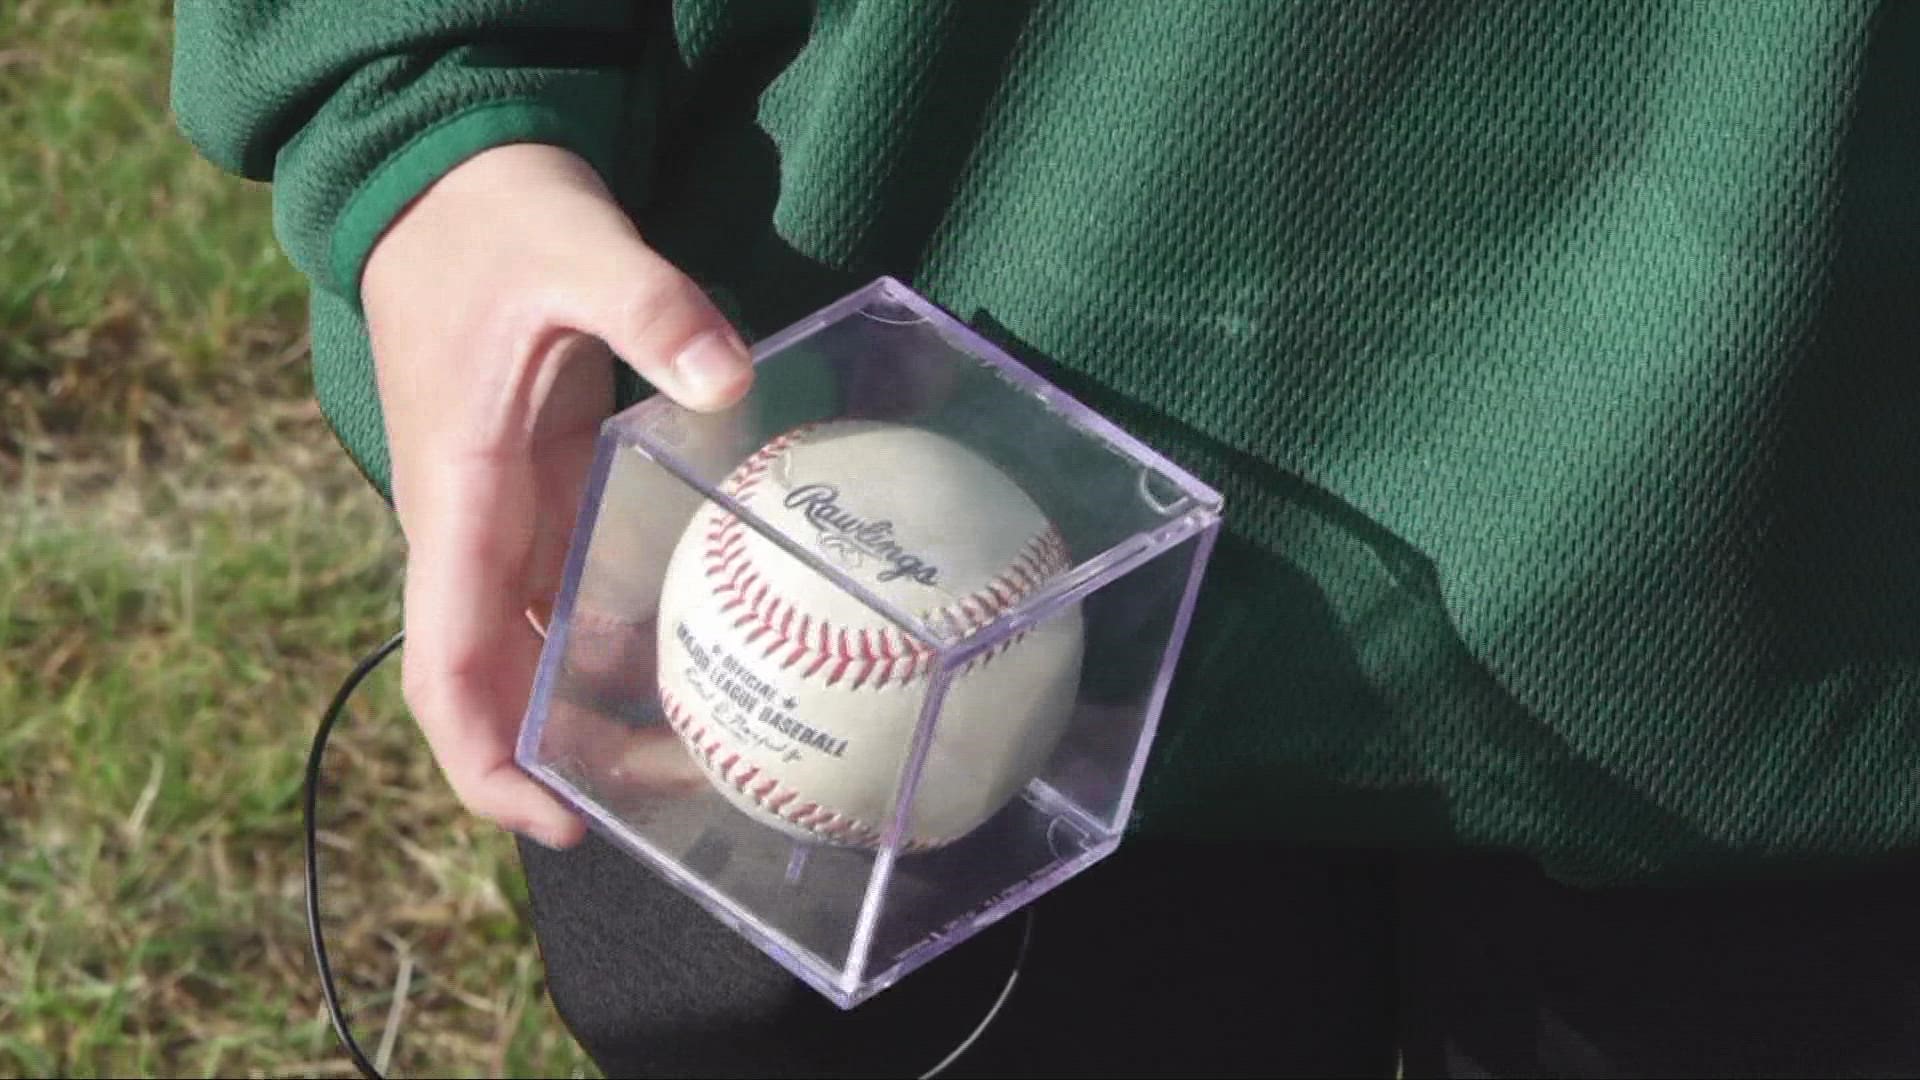 Westlake Softball player gives Oscar Gonzalez's walk-off home run ball to  him before ALDS game 3